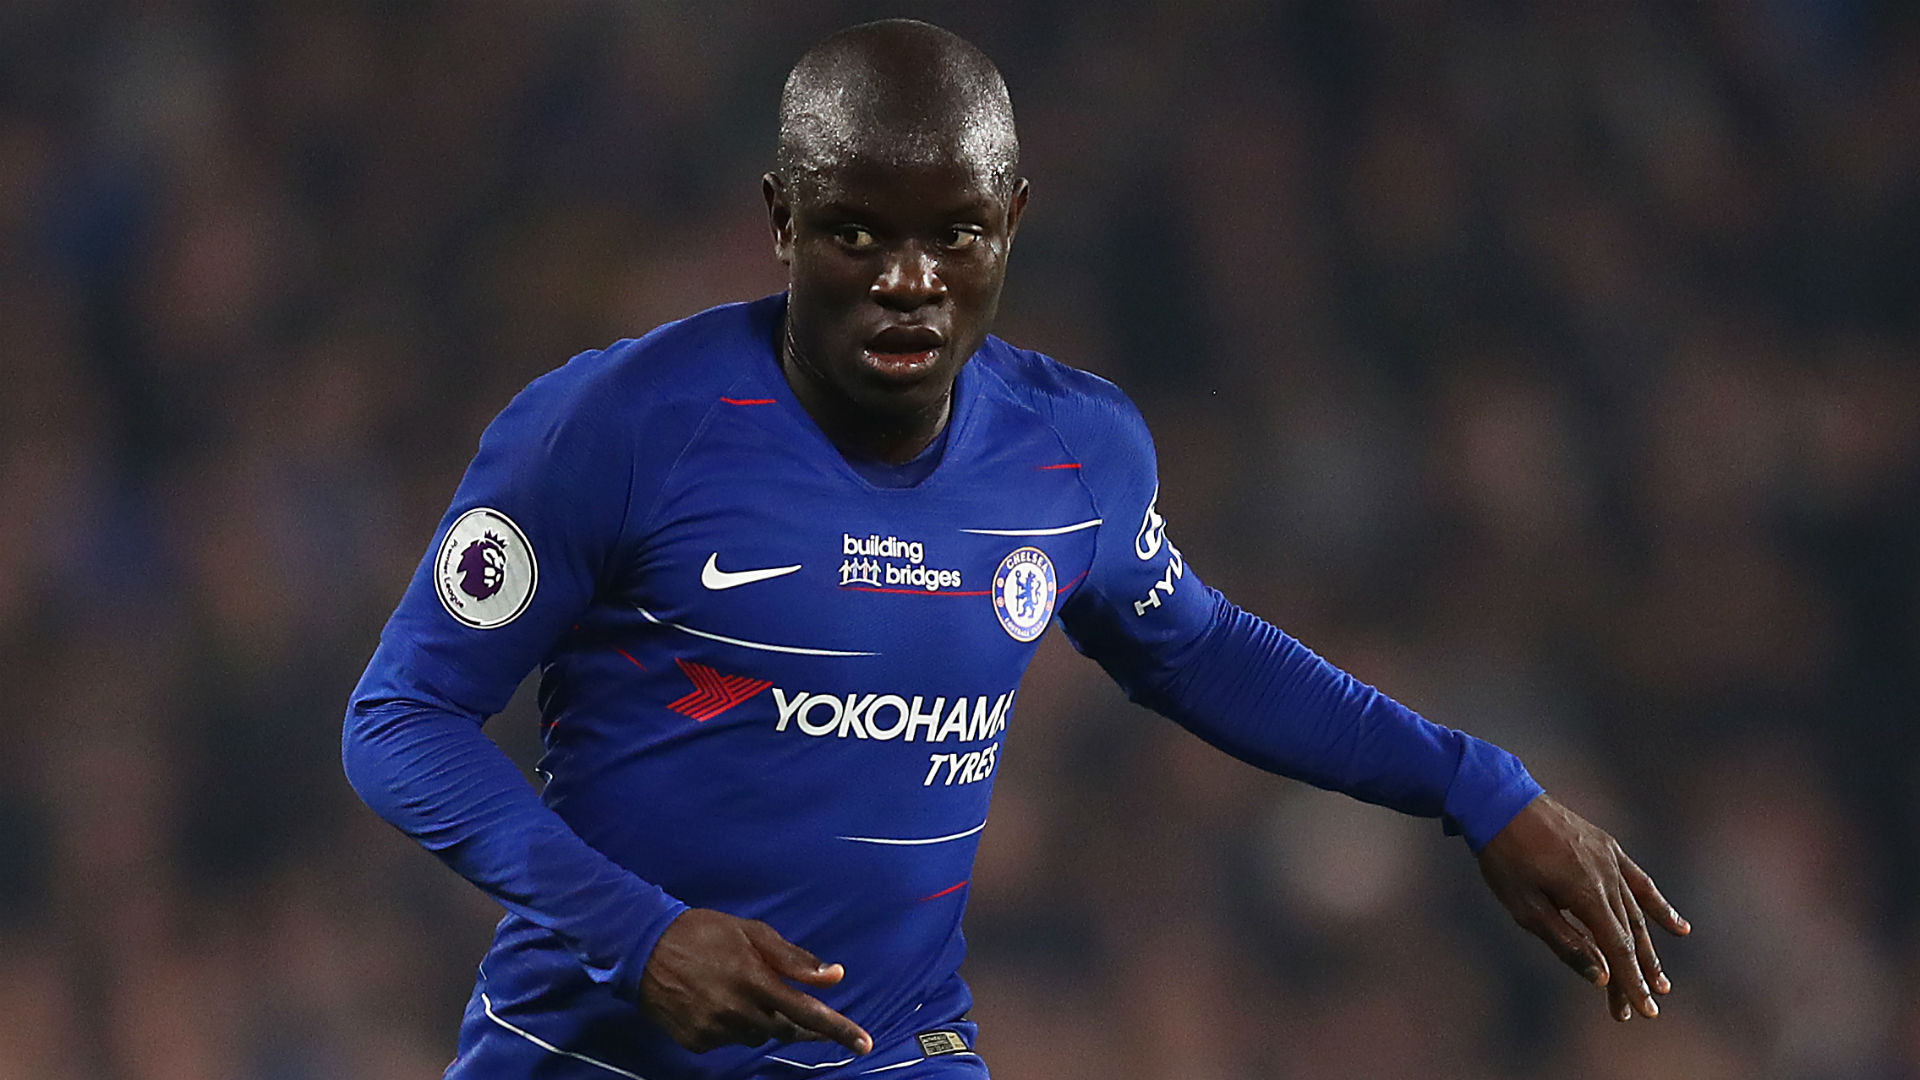 Frank Lampard retains hope N'Golo Kante will be fit for Chelsea's Premier League opener against Manchester United on August 11.